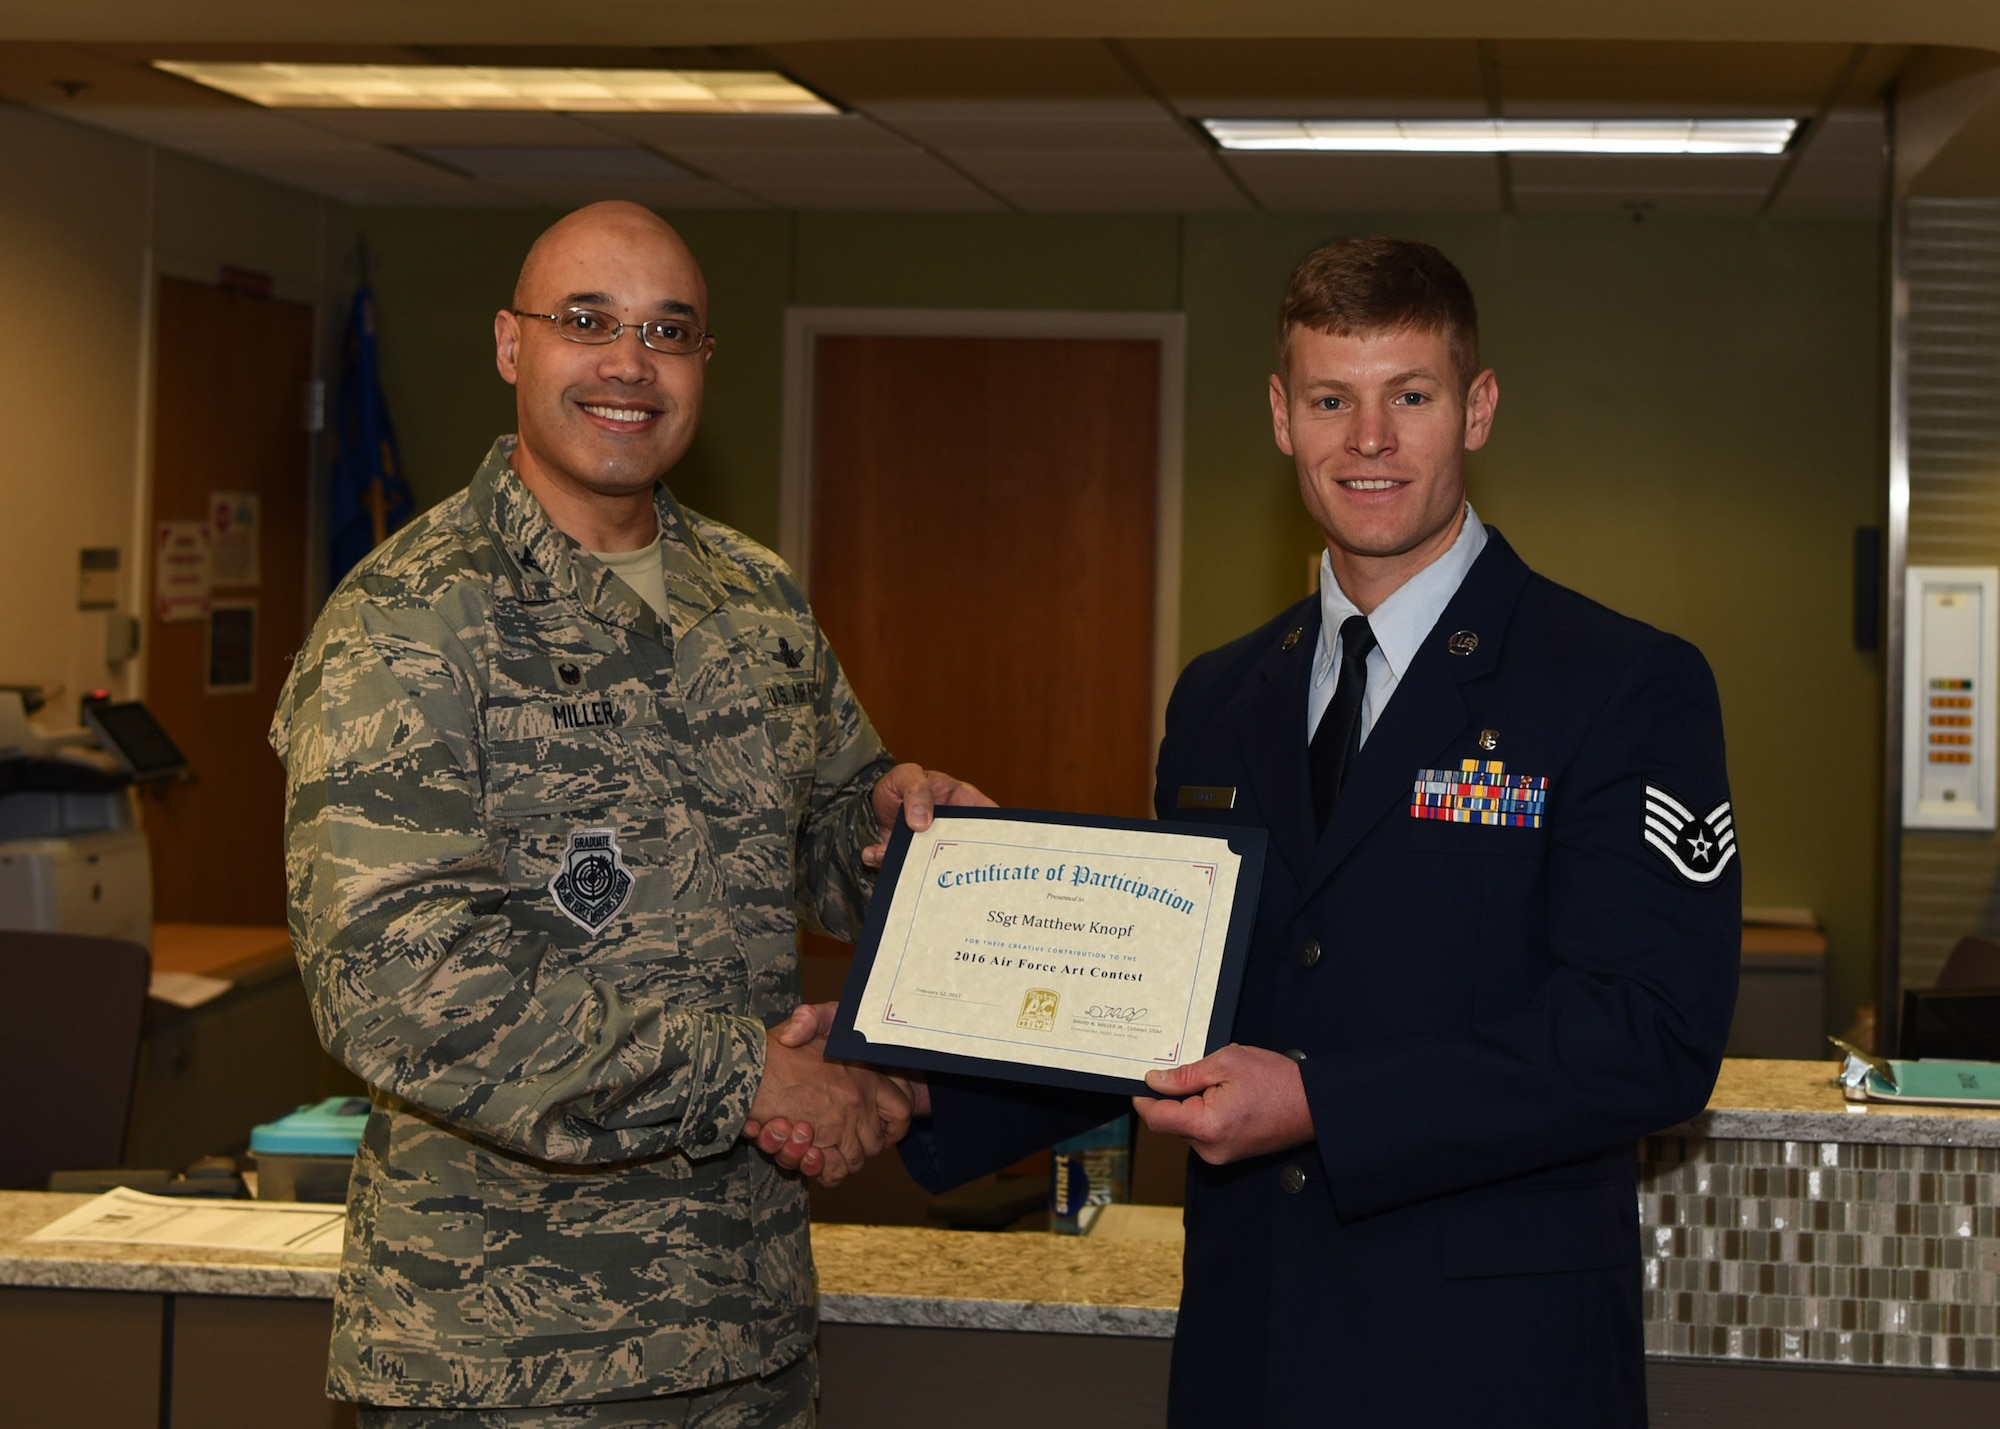 Col. David Miller Jr., 460th Space Wing commander, presents Staff Sgt. Matthew Knopf, 310th Aerospace Medical Flight health services management supervisor, with a certificate for his accomplishment of winning the 2016 Air Force Art Contest in the accomplished artist category Feb. 12, 2017, on Buckley Air Force Base, Colo. Knopf’s painting was selected from a total of 326 entries in the adult accomplished artist category. (U.S. Air Force photo by Airman Holden S. Faul/ Released)